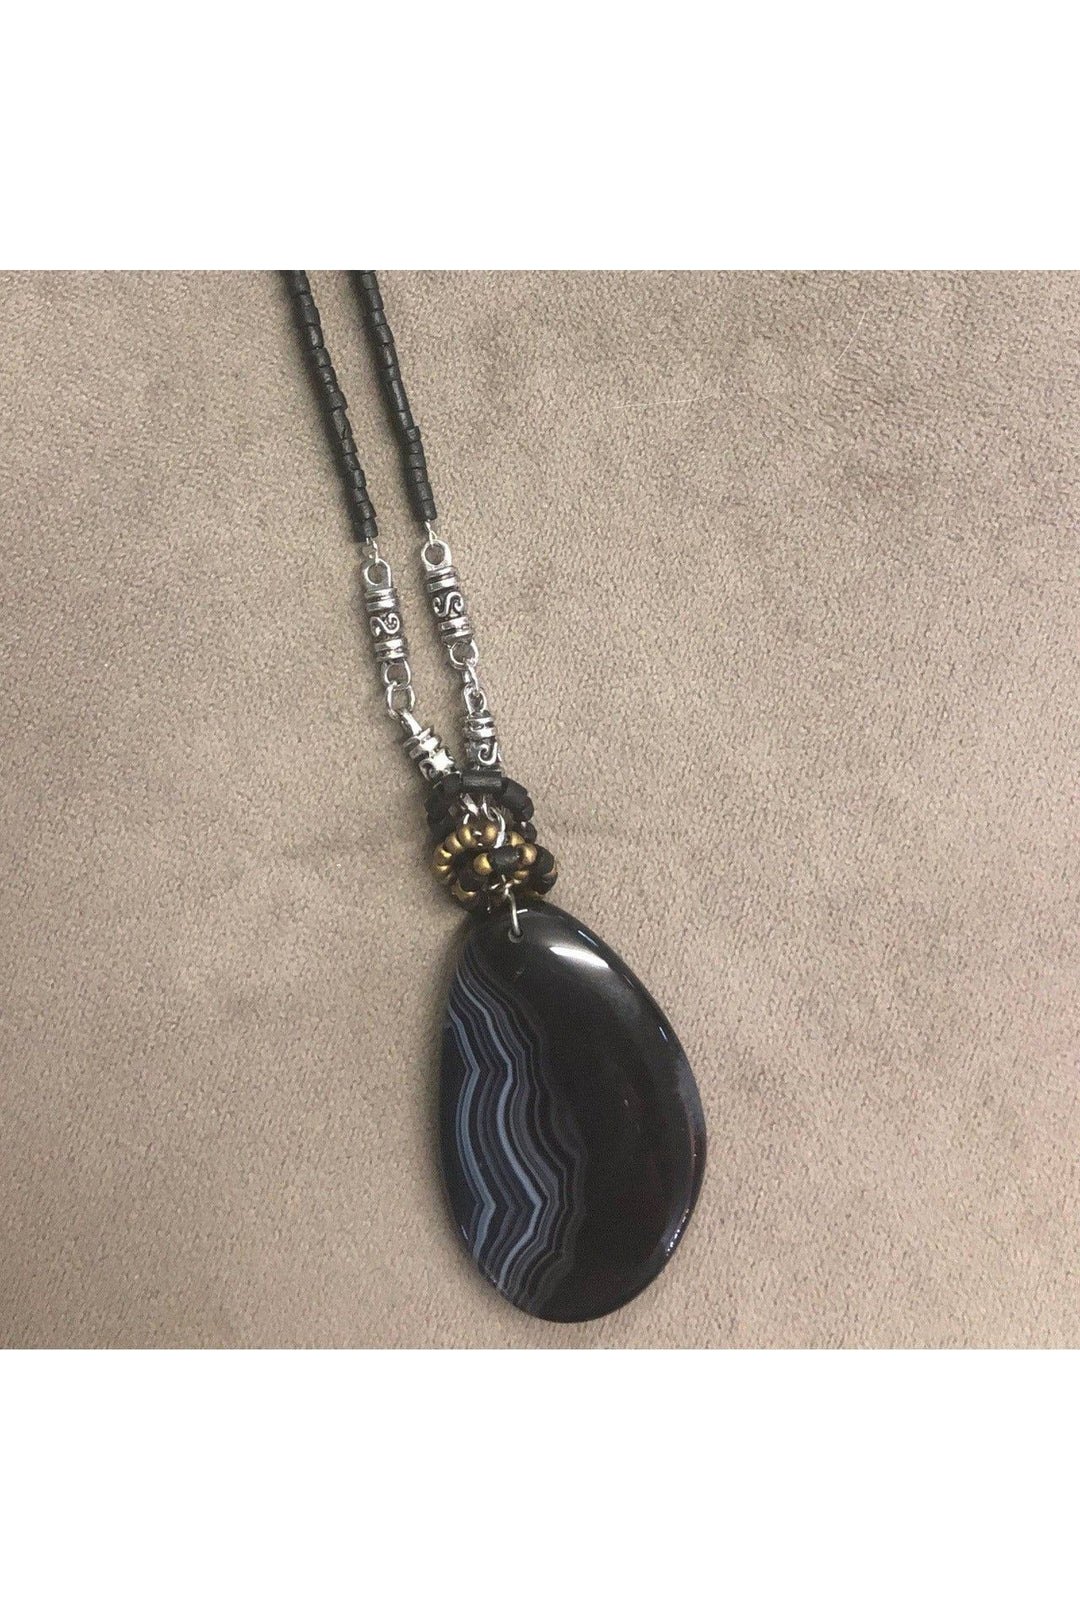 Treska Agate Pendant Necklace-Jewelry-Treska-Vintage Dragonfly-Women’s Fashion Boutique Located in Sumrall, Mississippi